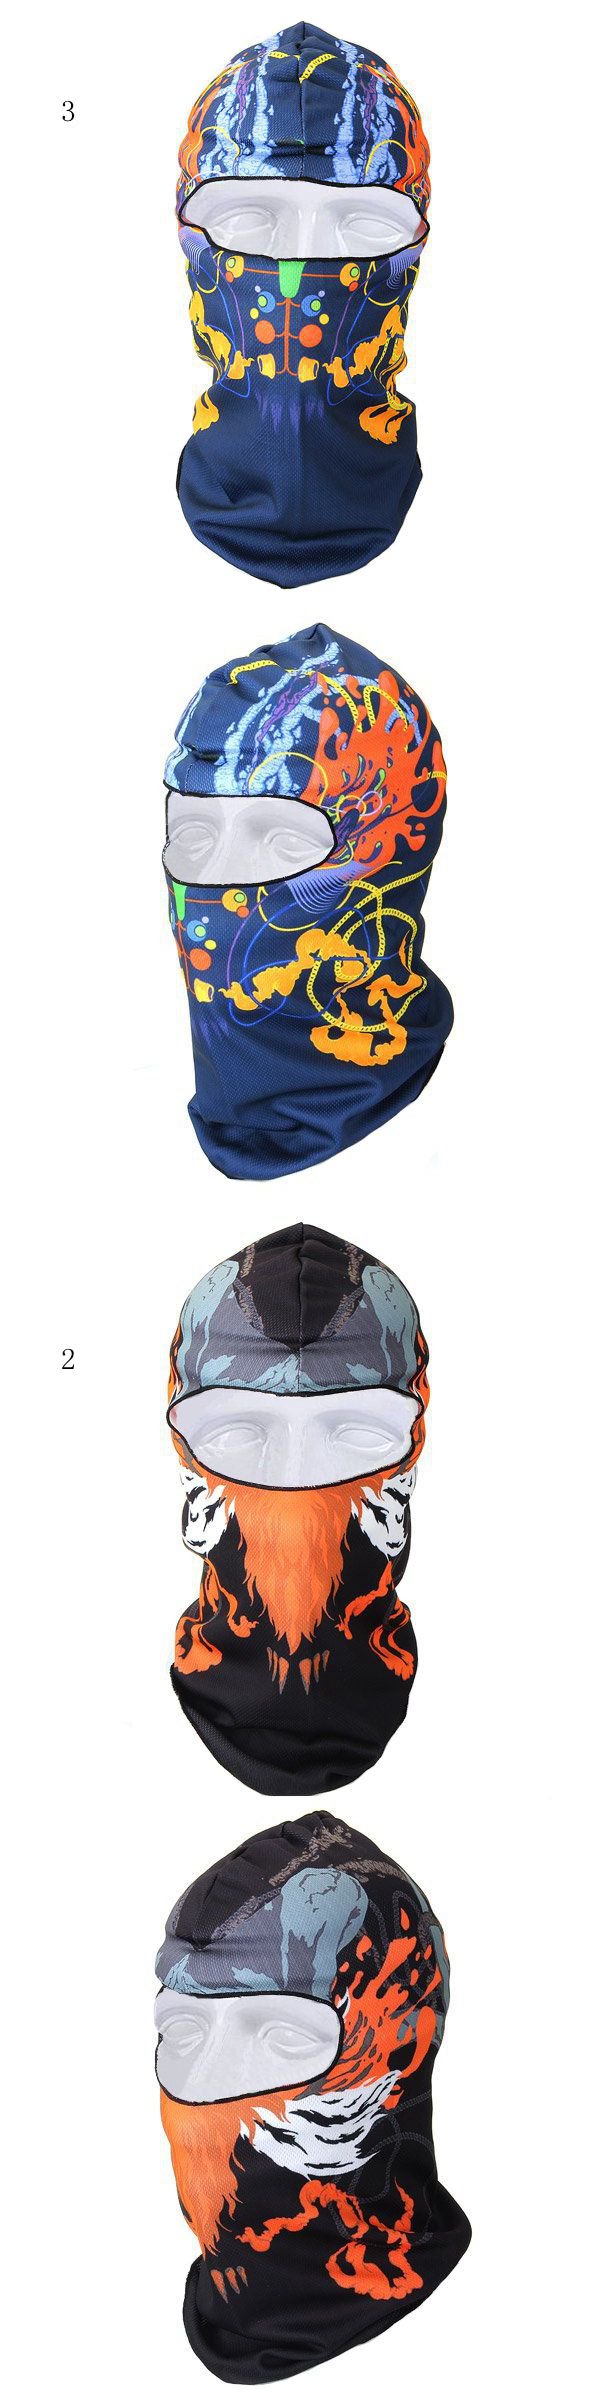 Men-Women-Winter-Neck-Face-Mask-Printed-Skiing-Hat-Cycling-Caps-1021402